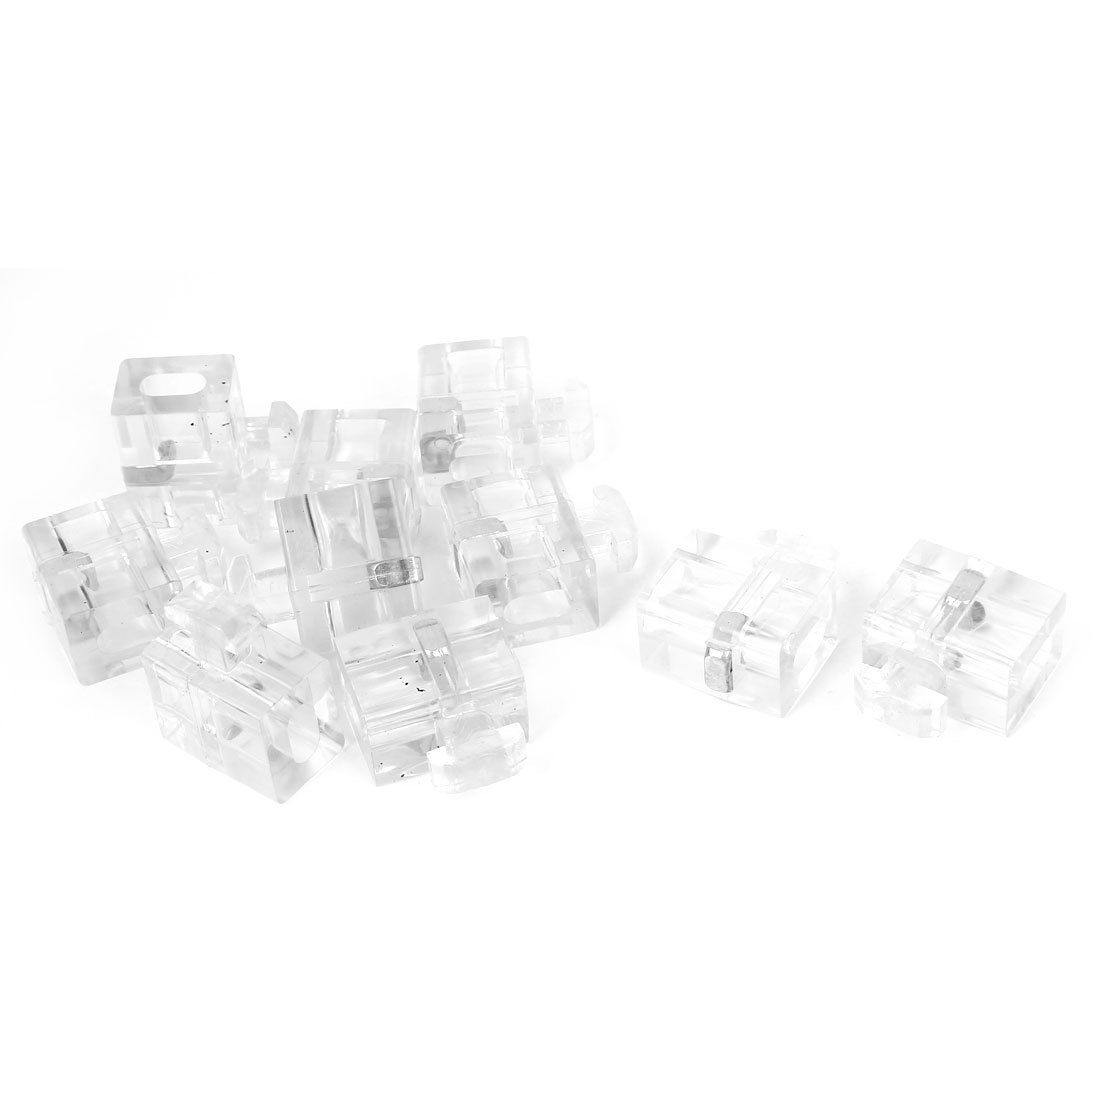 20 Series Aluminium fittings Spacer Partitions Glass connection block type A -Pack of 1 - Extrusion and CNC